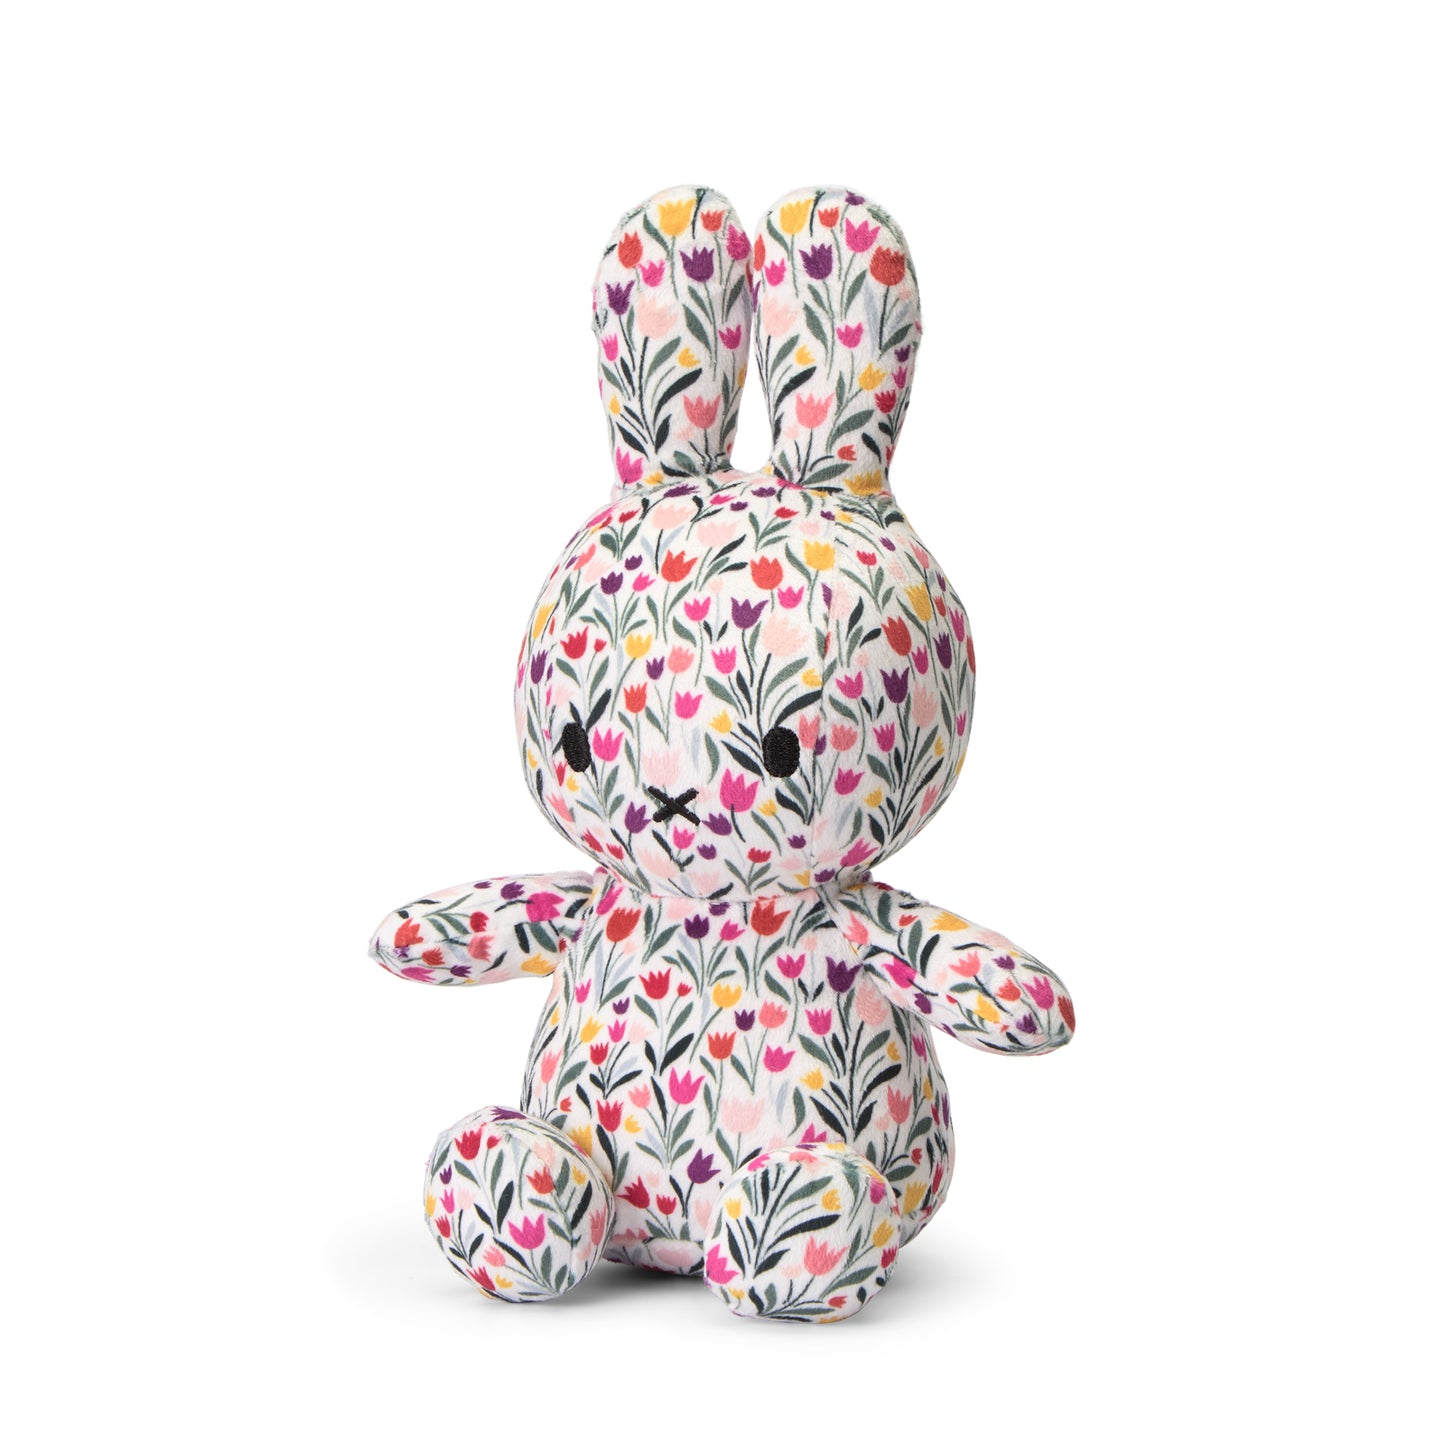 Miffy Sitting All-Over Tulip - 23cm - 9"